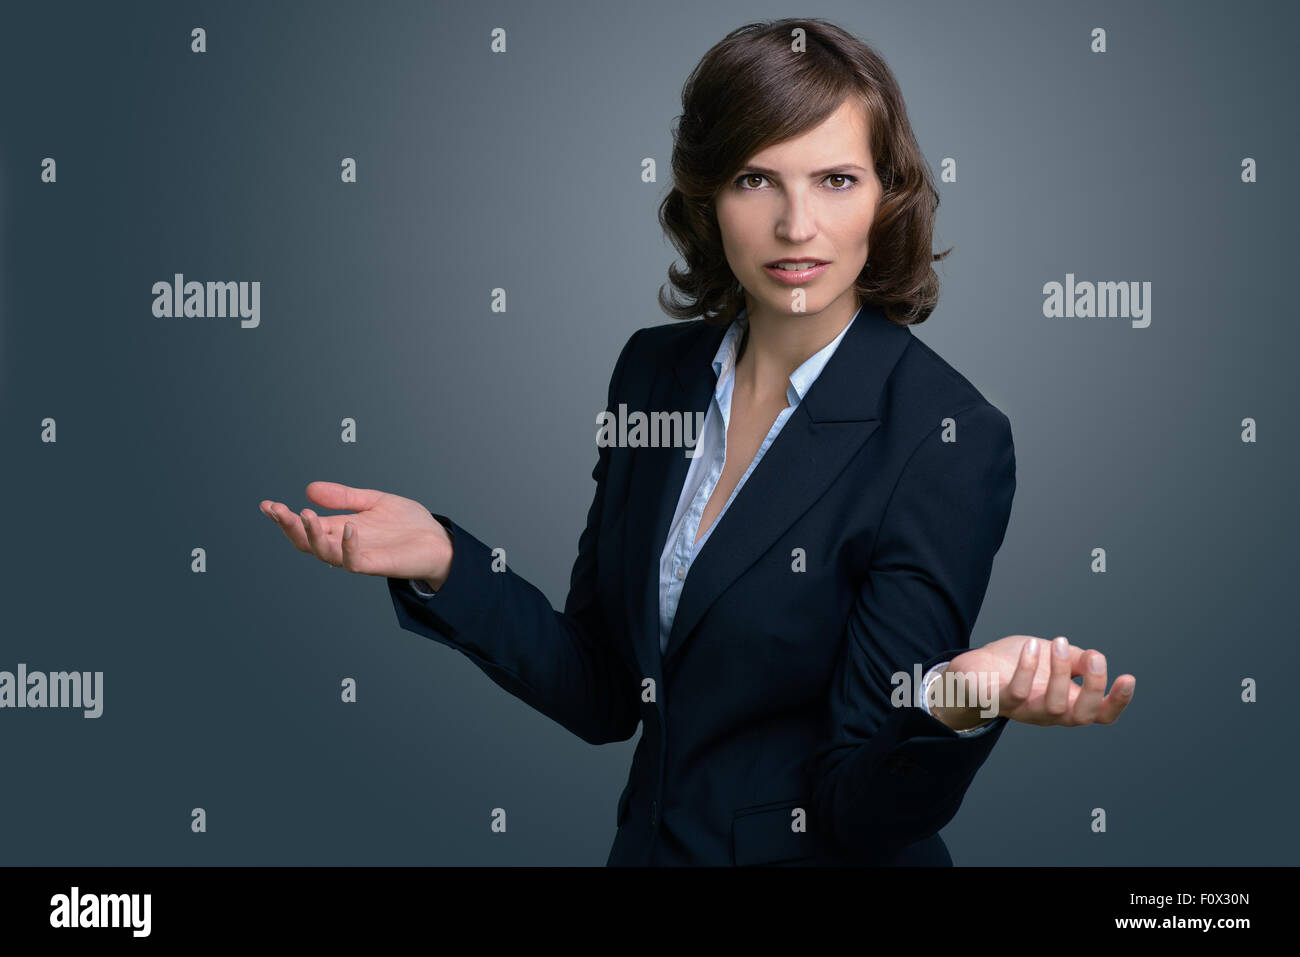 Half Body Shot of a Confused Young Businesswoman with Hands in the Air, Looking into the Distance Against Gray Wall. Stock Photo